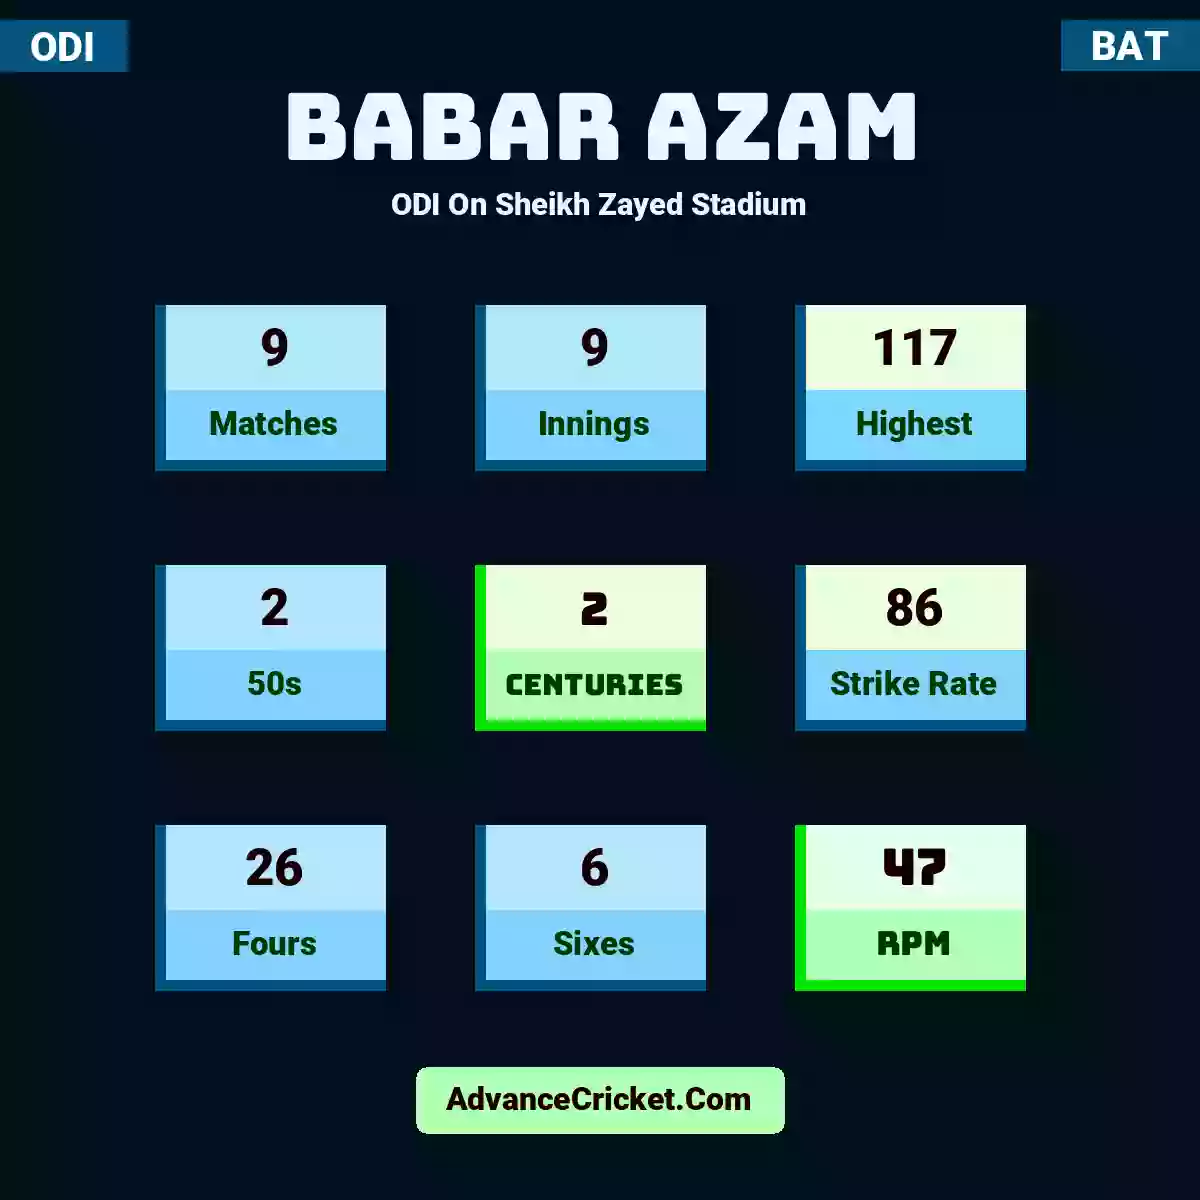 Babar Azam ODI  On Sheikh Zayed Stadium, Babar Azam played 9 matches, scored 117 runs as highest, 2 half-centuries, and 2 centuries, with a strike rate of 86. B.Azam hit 26 fours and 6 sixes, with an RPM of 47.